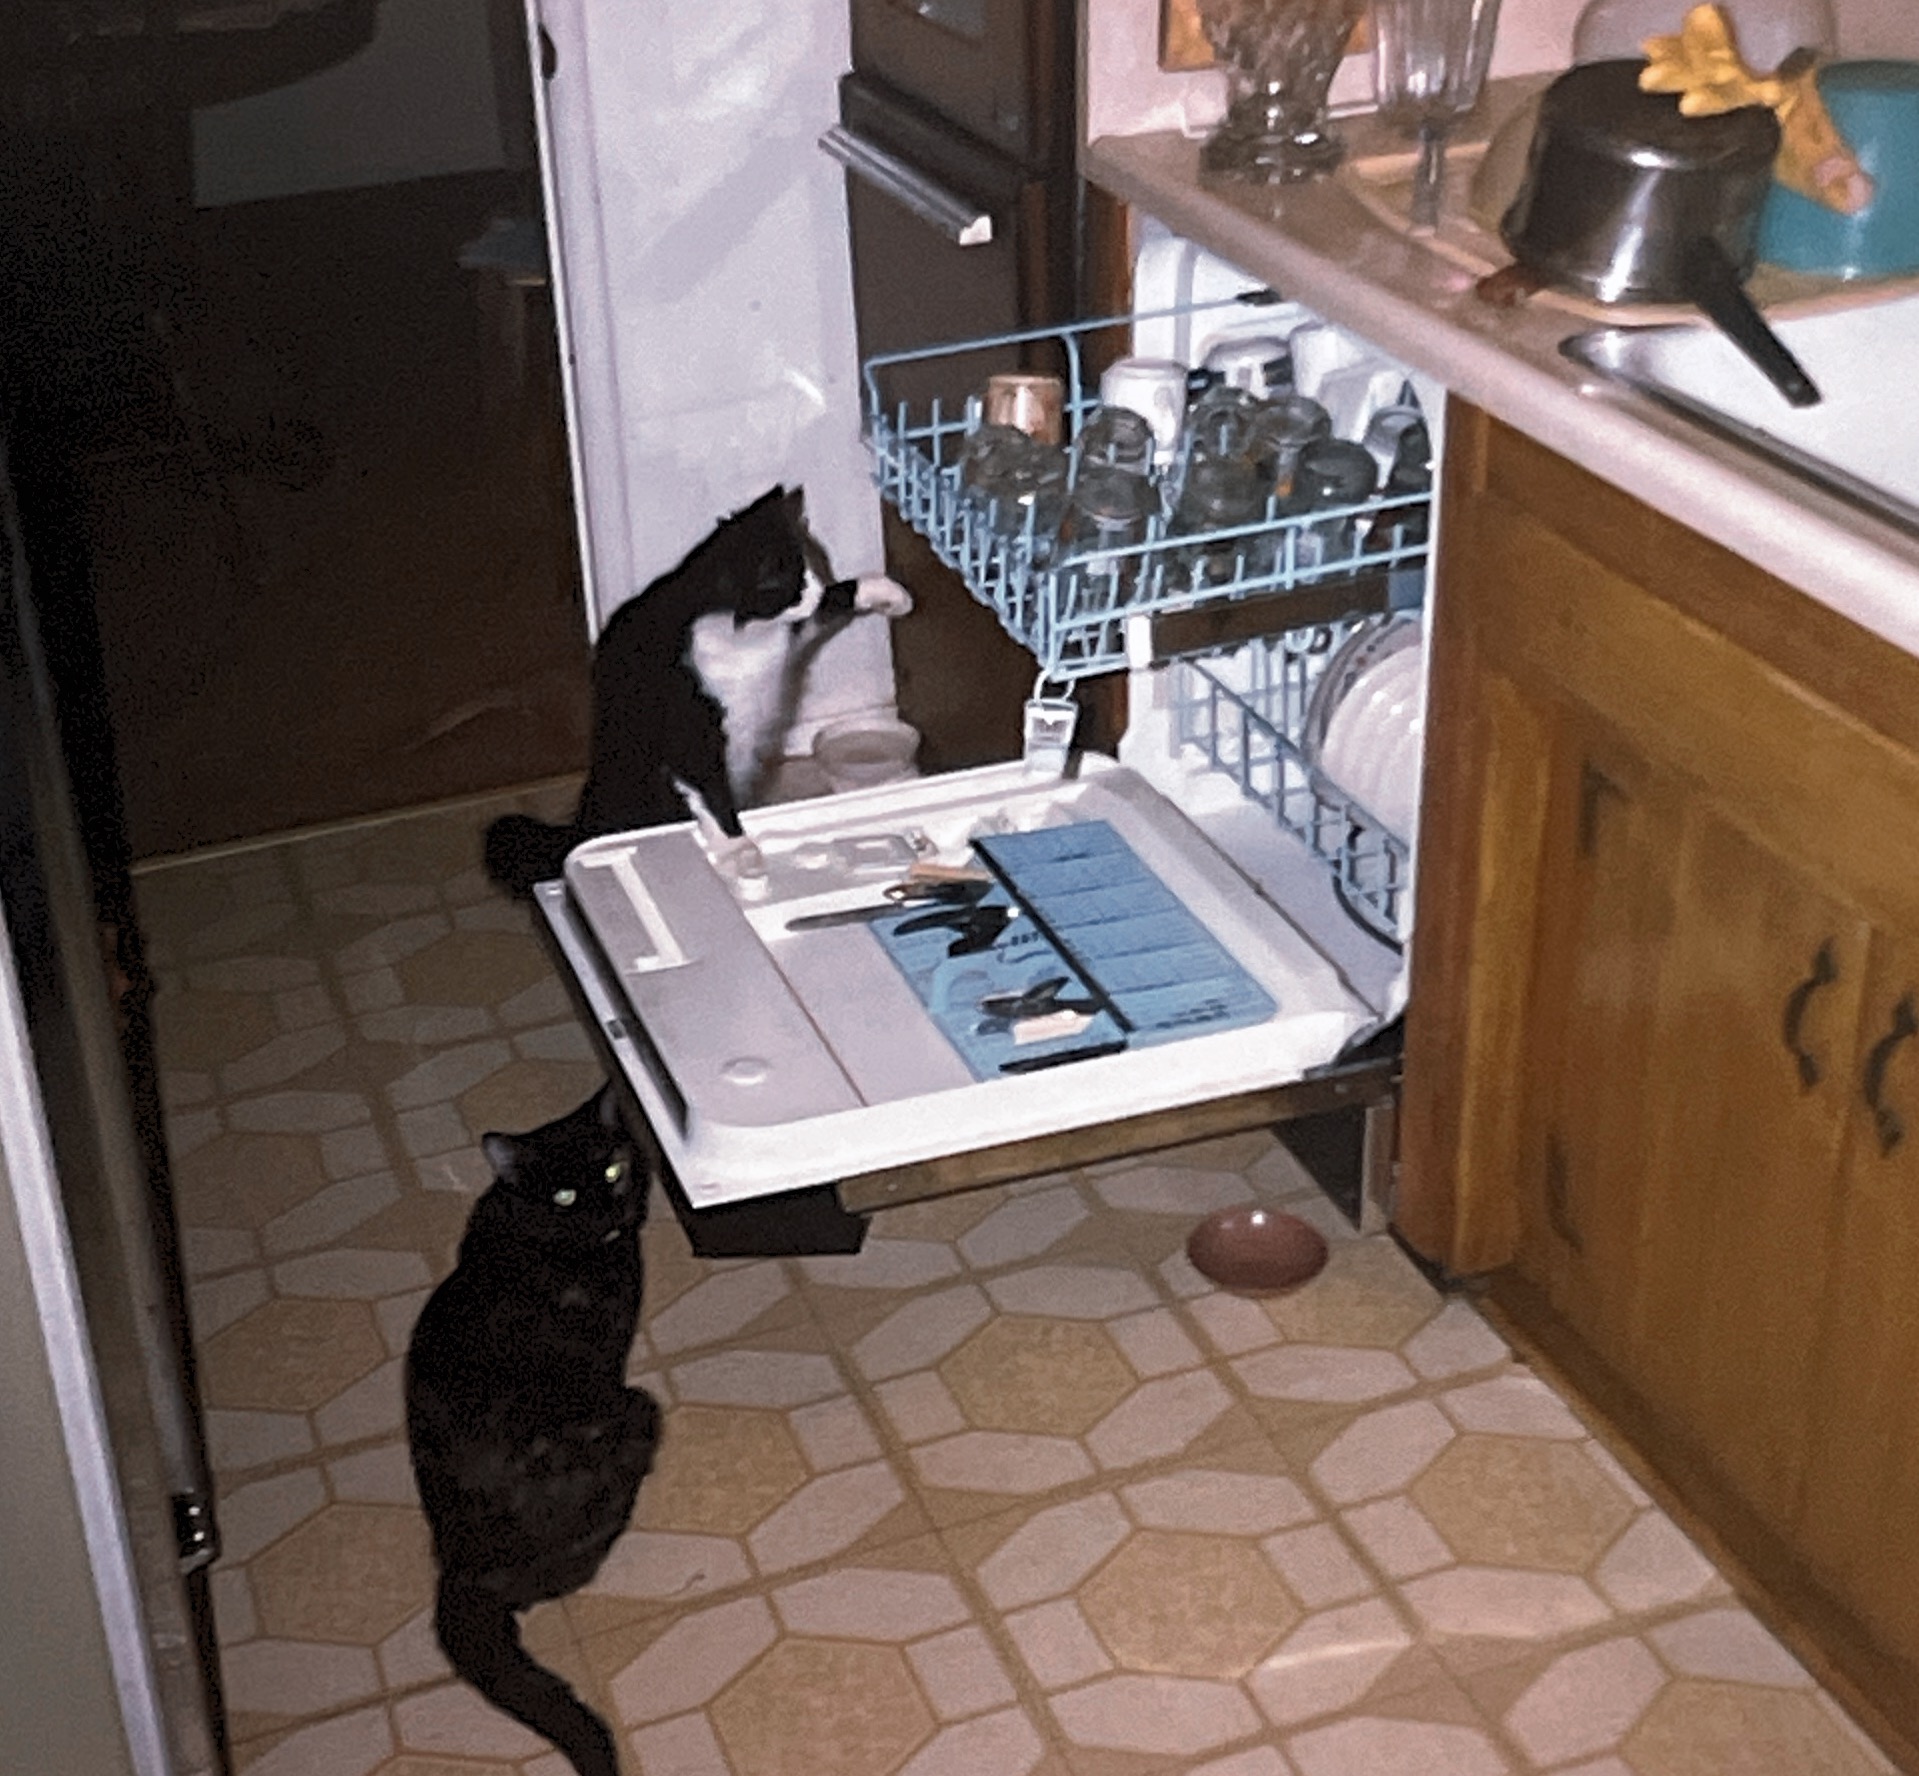 Trying to decide whose turn it is to clean out the dishwasher 1987